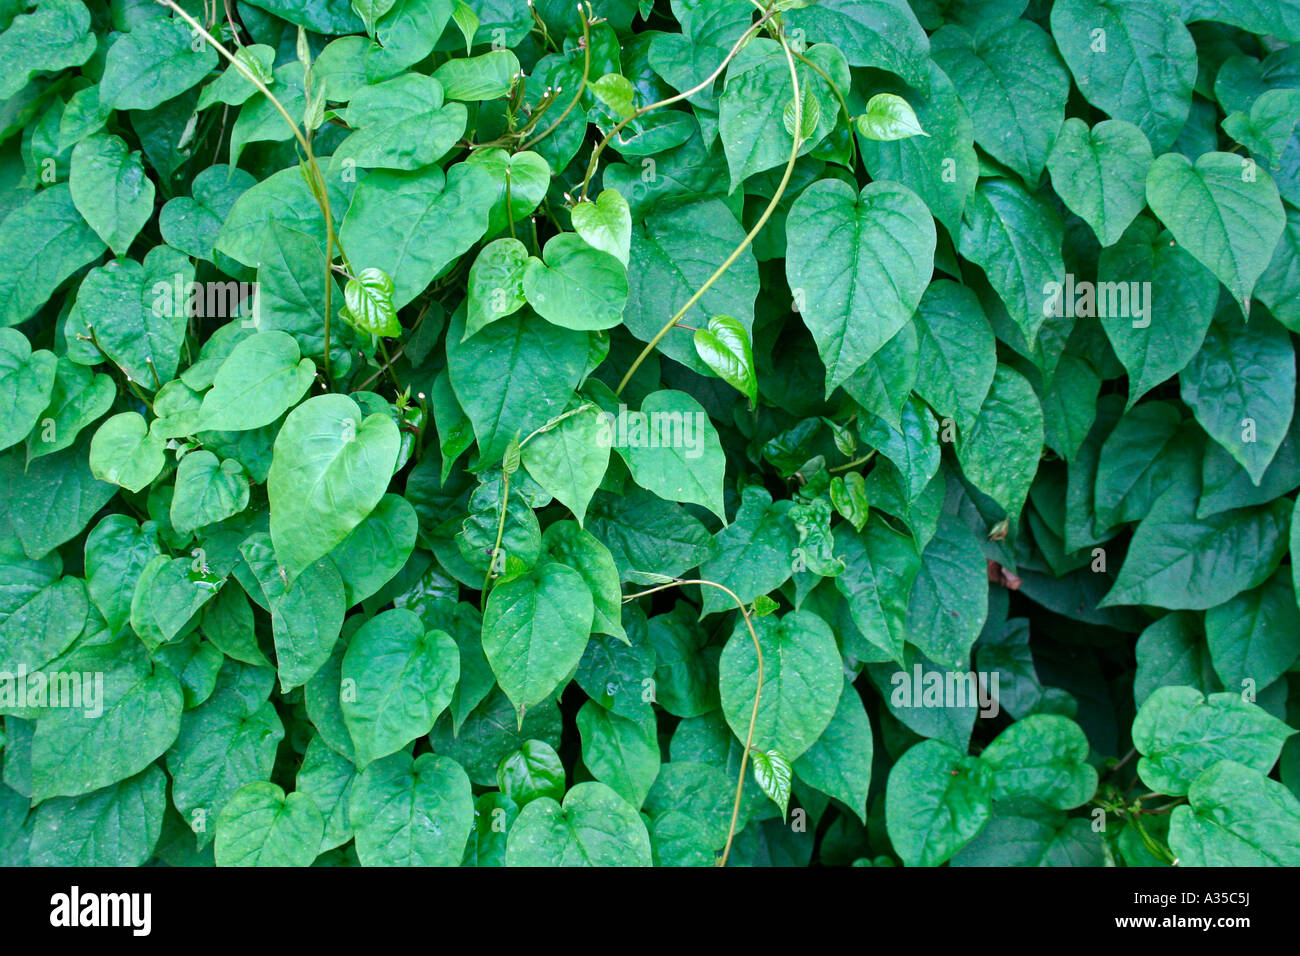 Background of green leaves Stock Photo